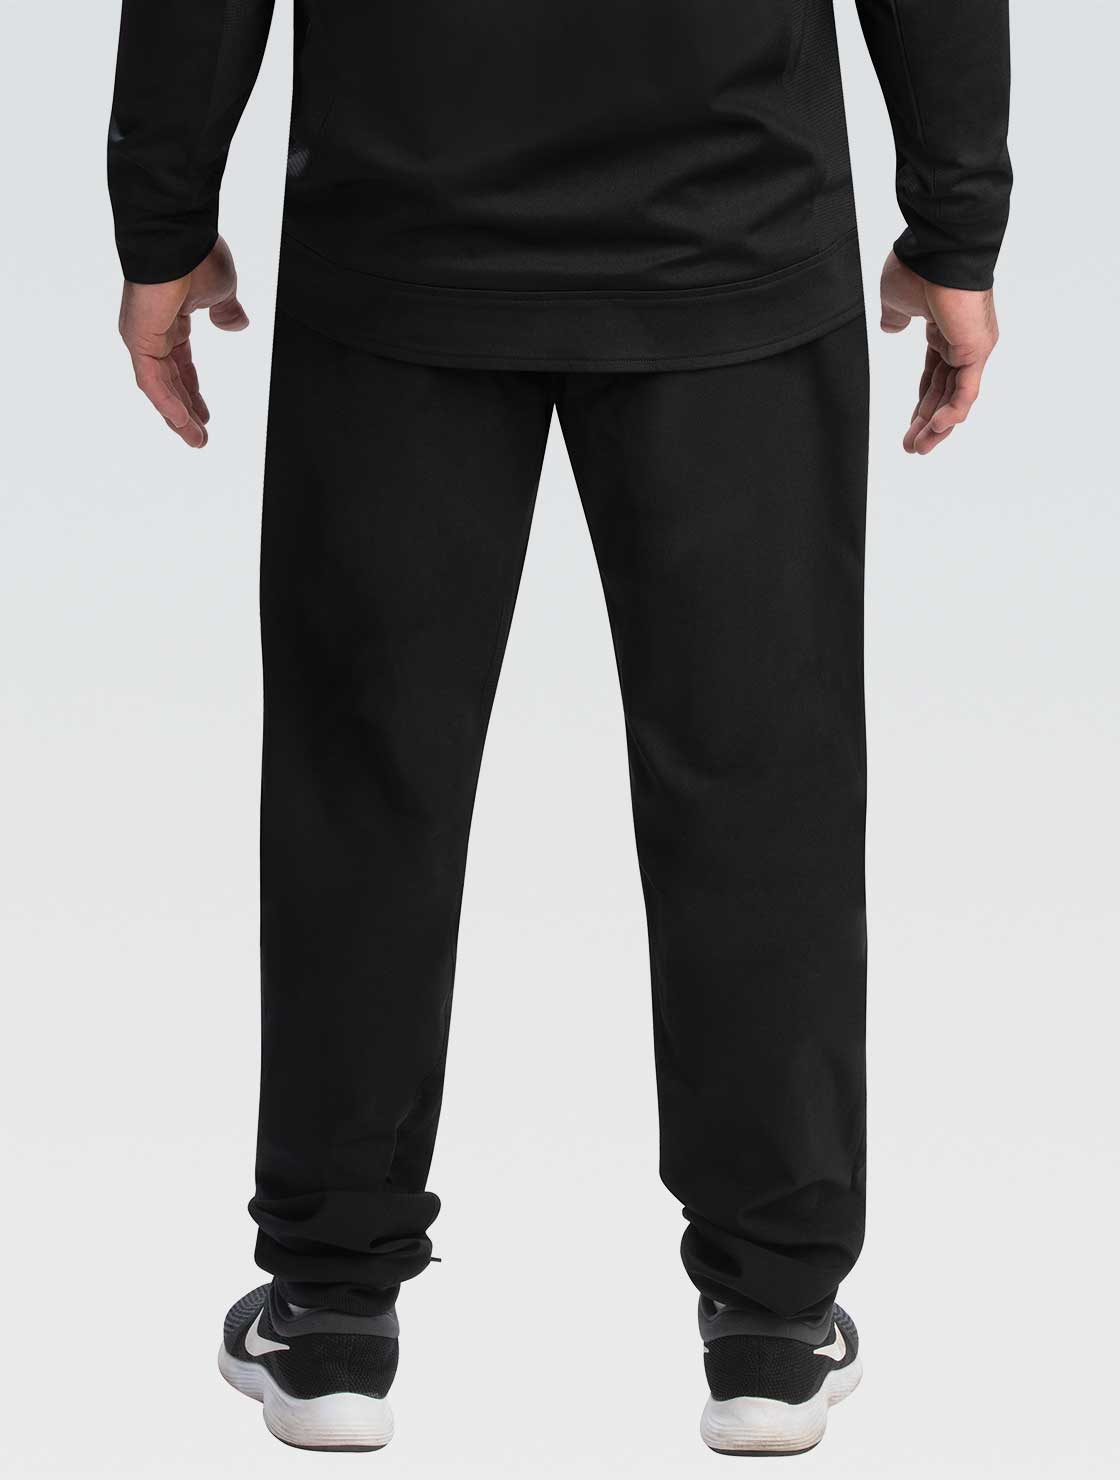 Men's Relaxed Fit Heavyweight Pants - WarmUps